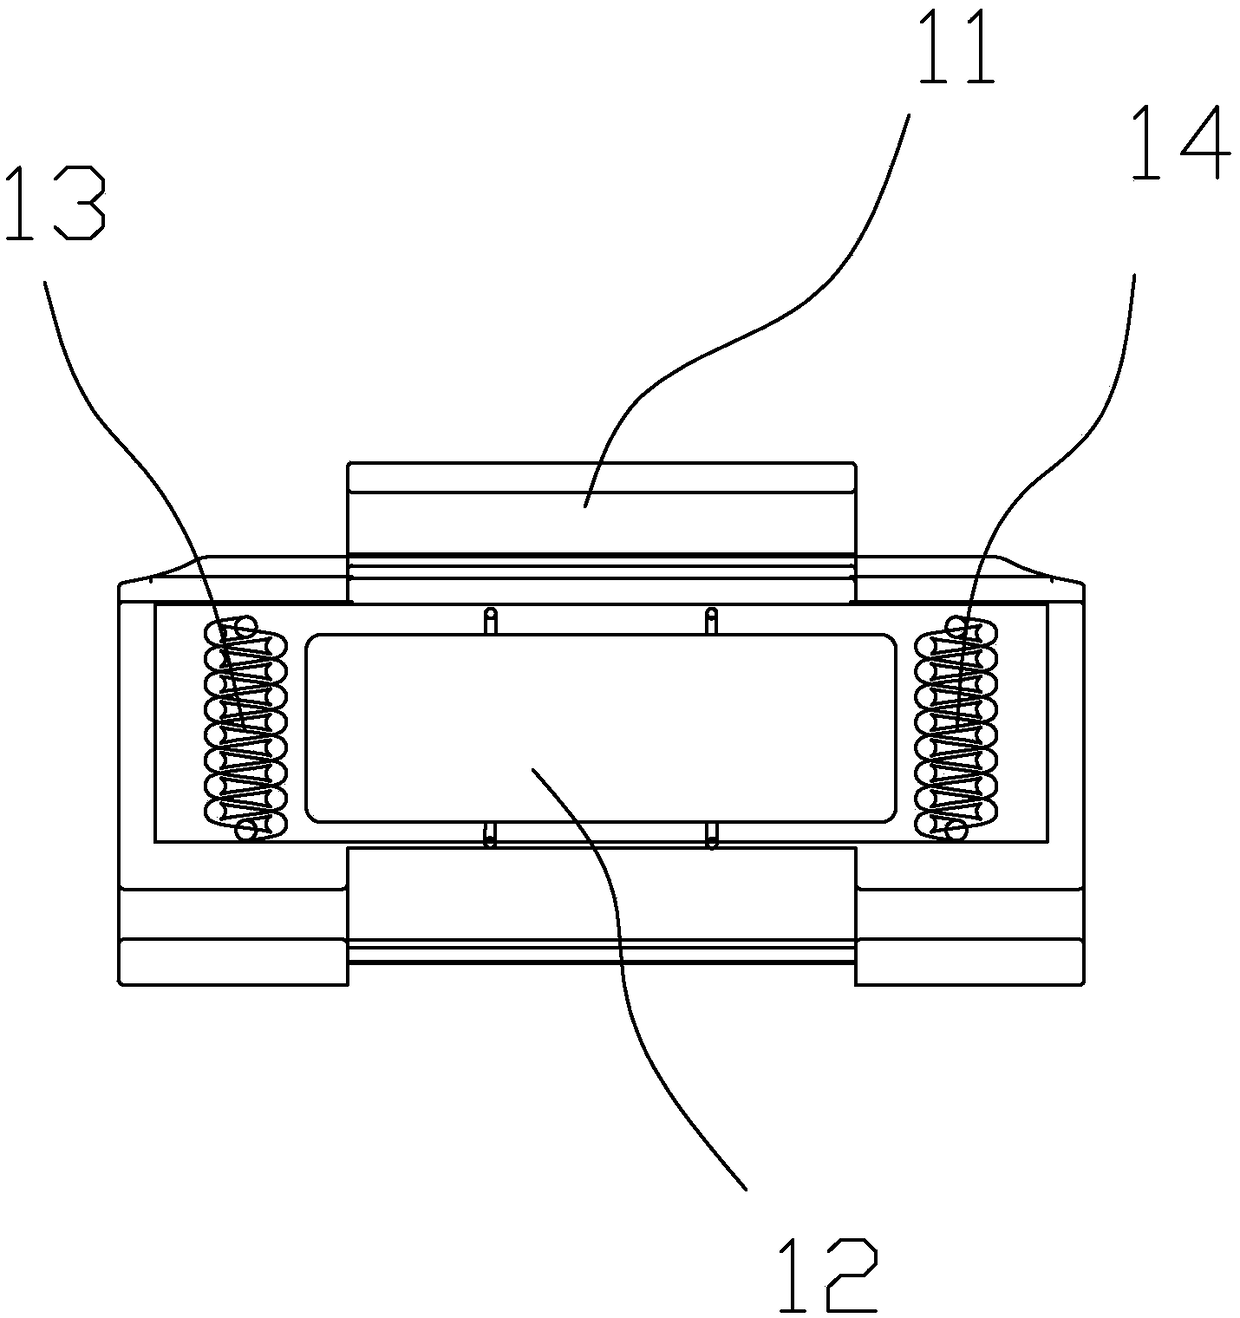 Smart photovoltaic charging system assembly and photovoltaic charging system control method